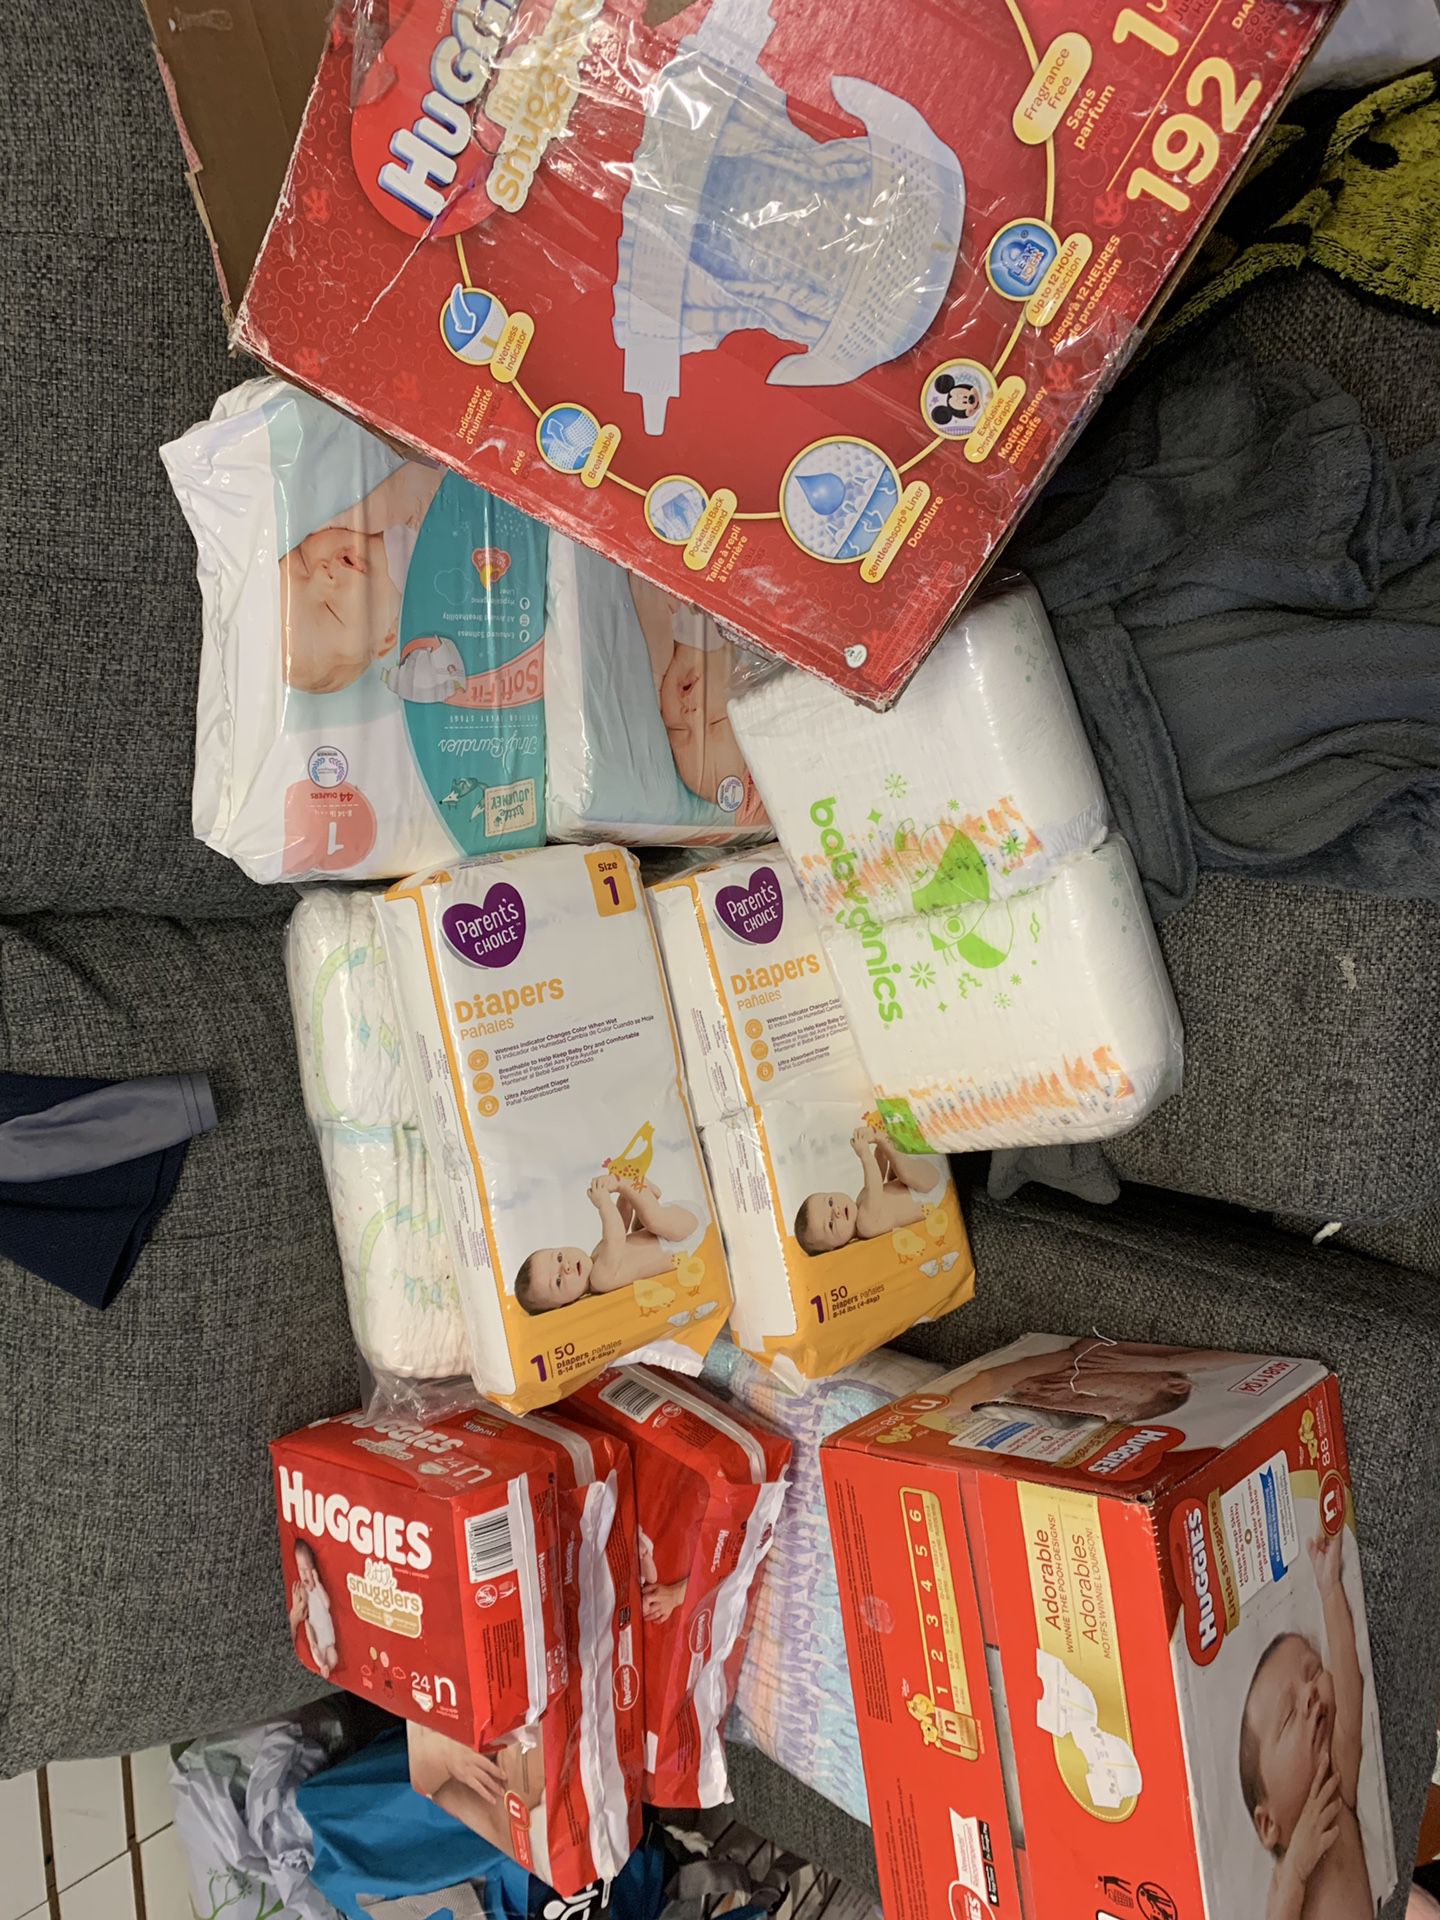 Newborn and Size 1 diapers